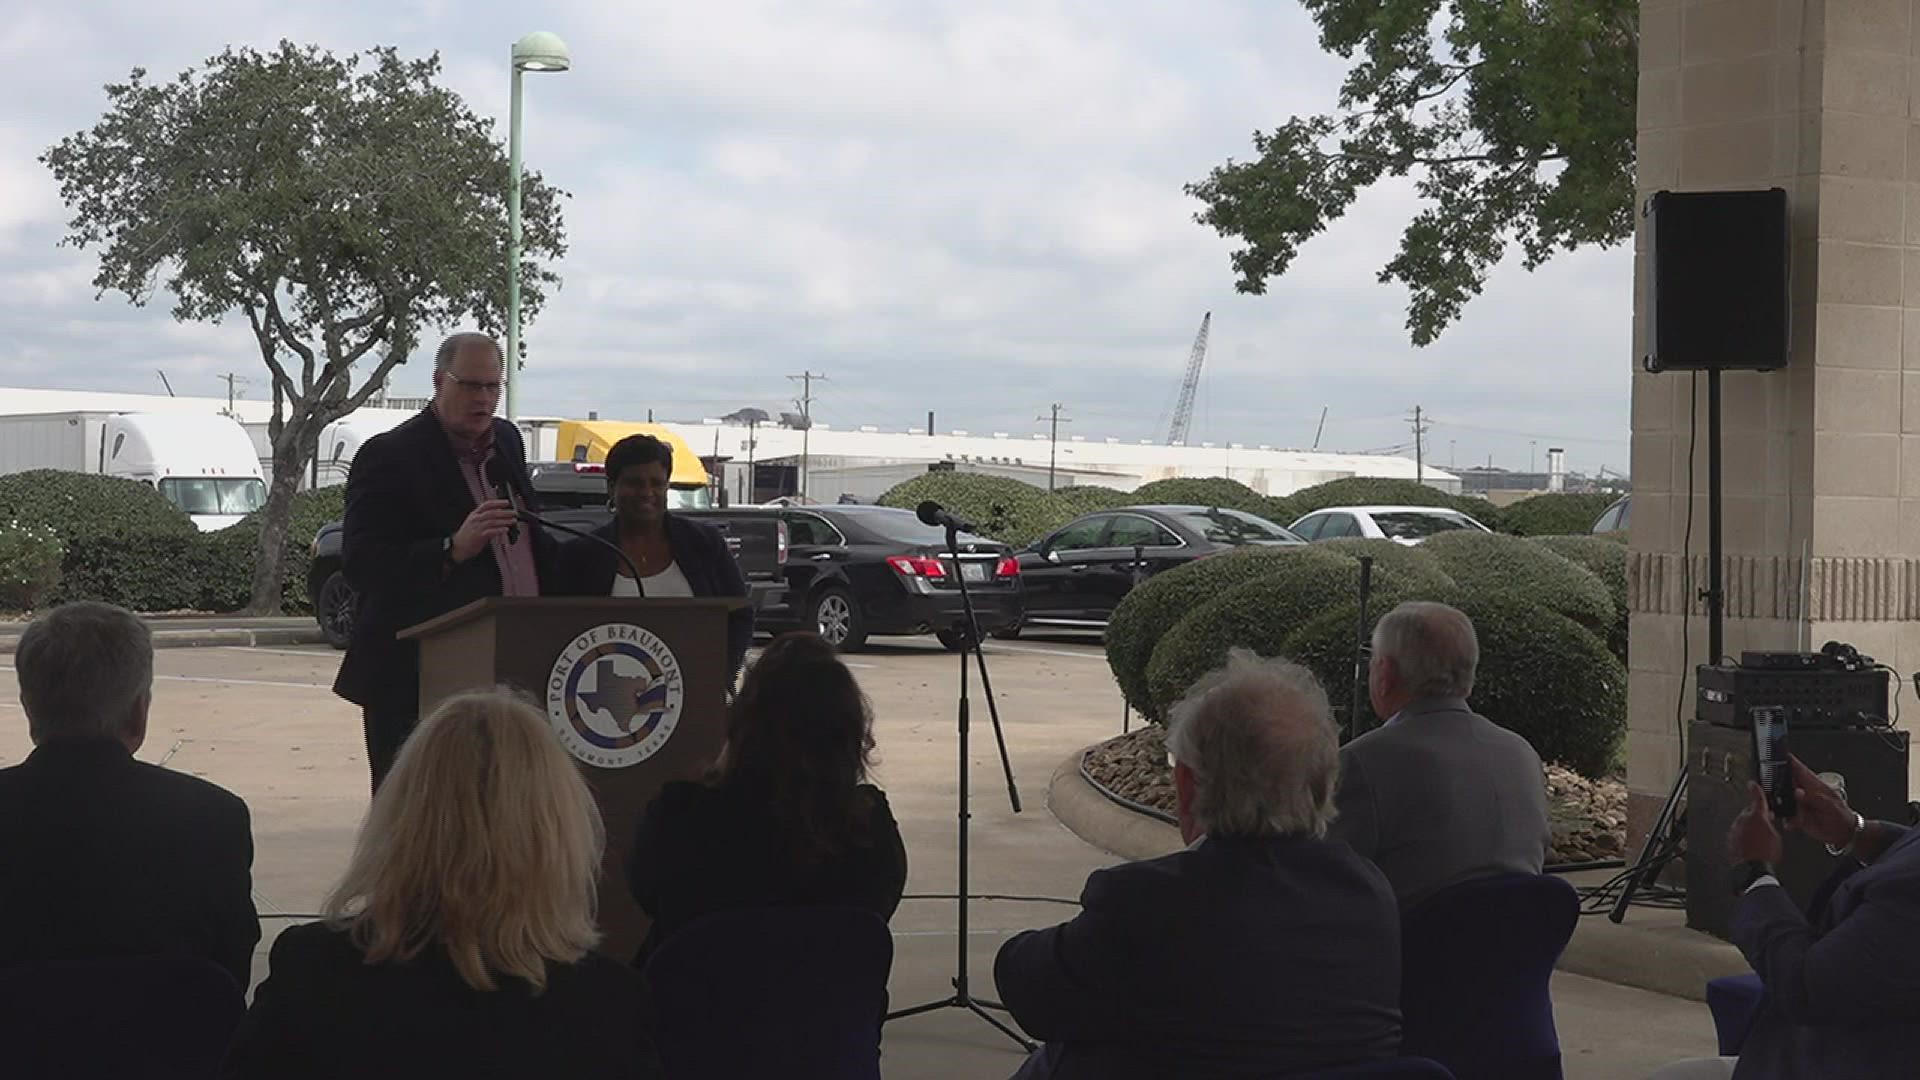 The funds will allow the port to expand its cargo capacity and bring more jobs to the area.